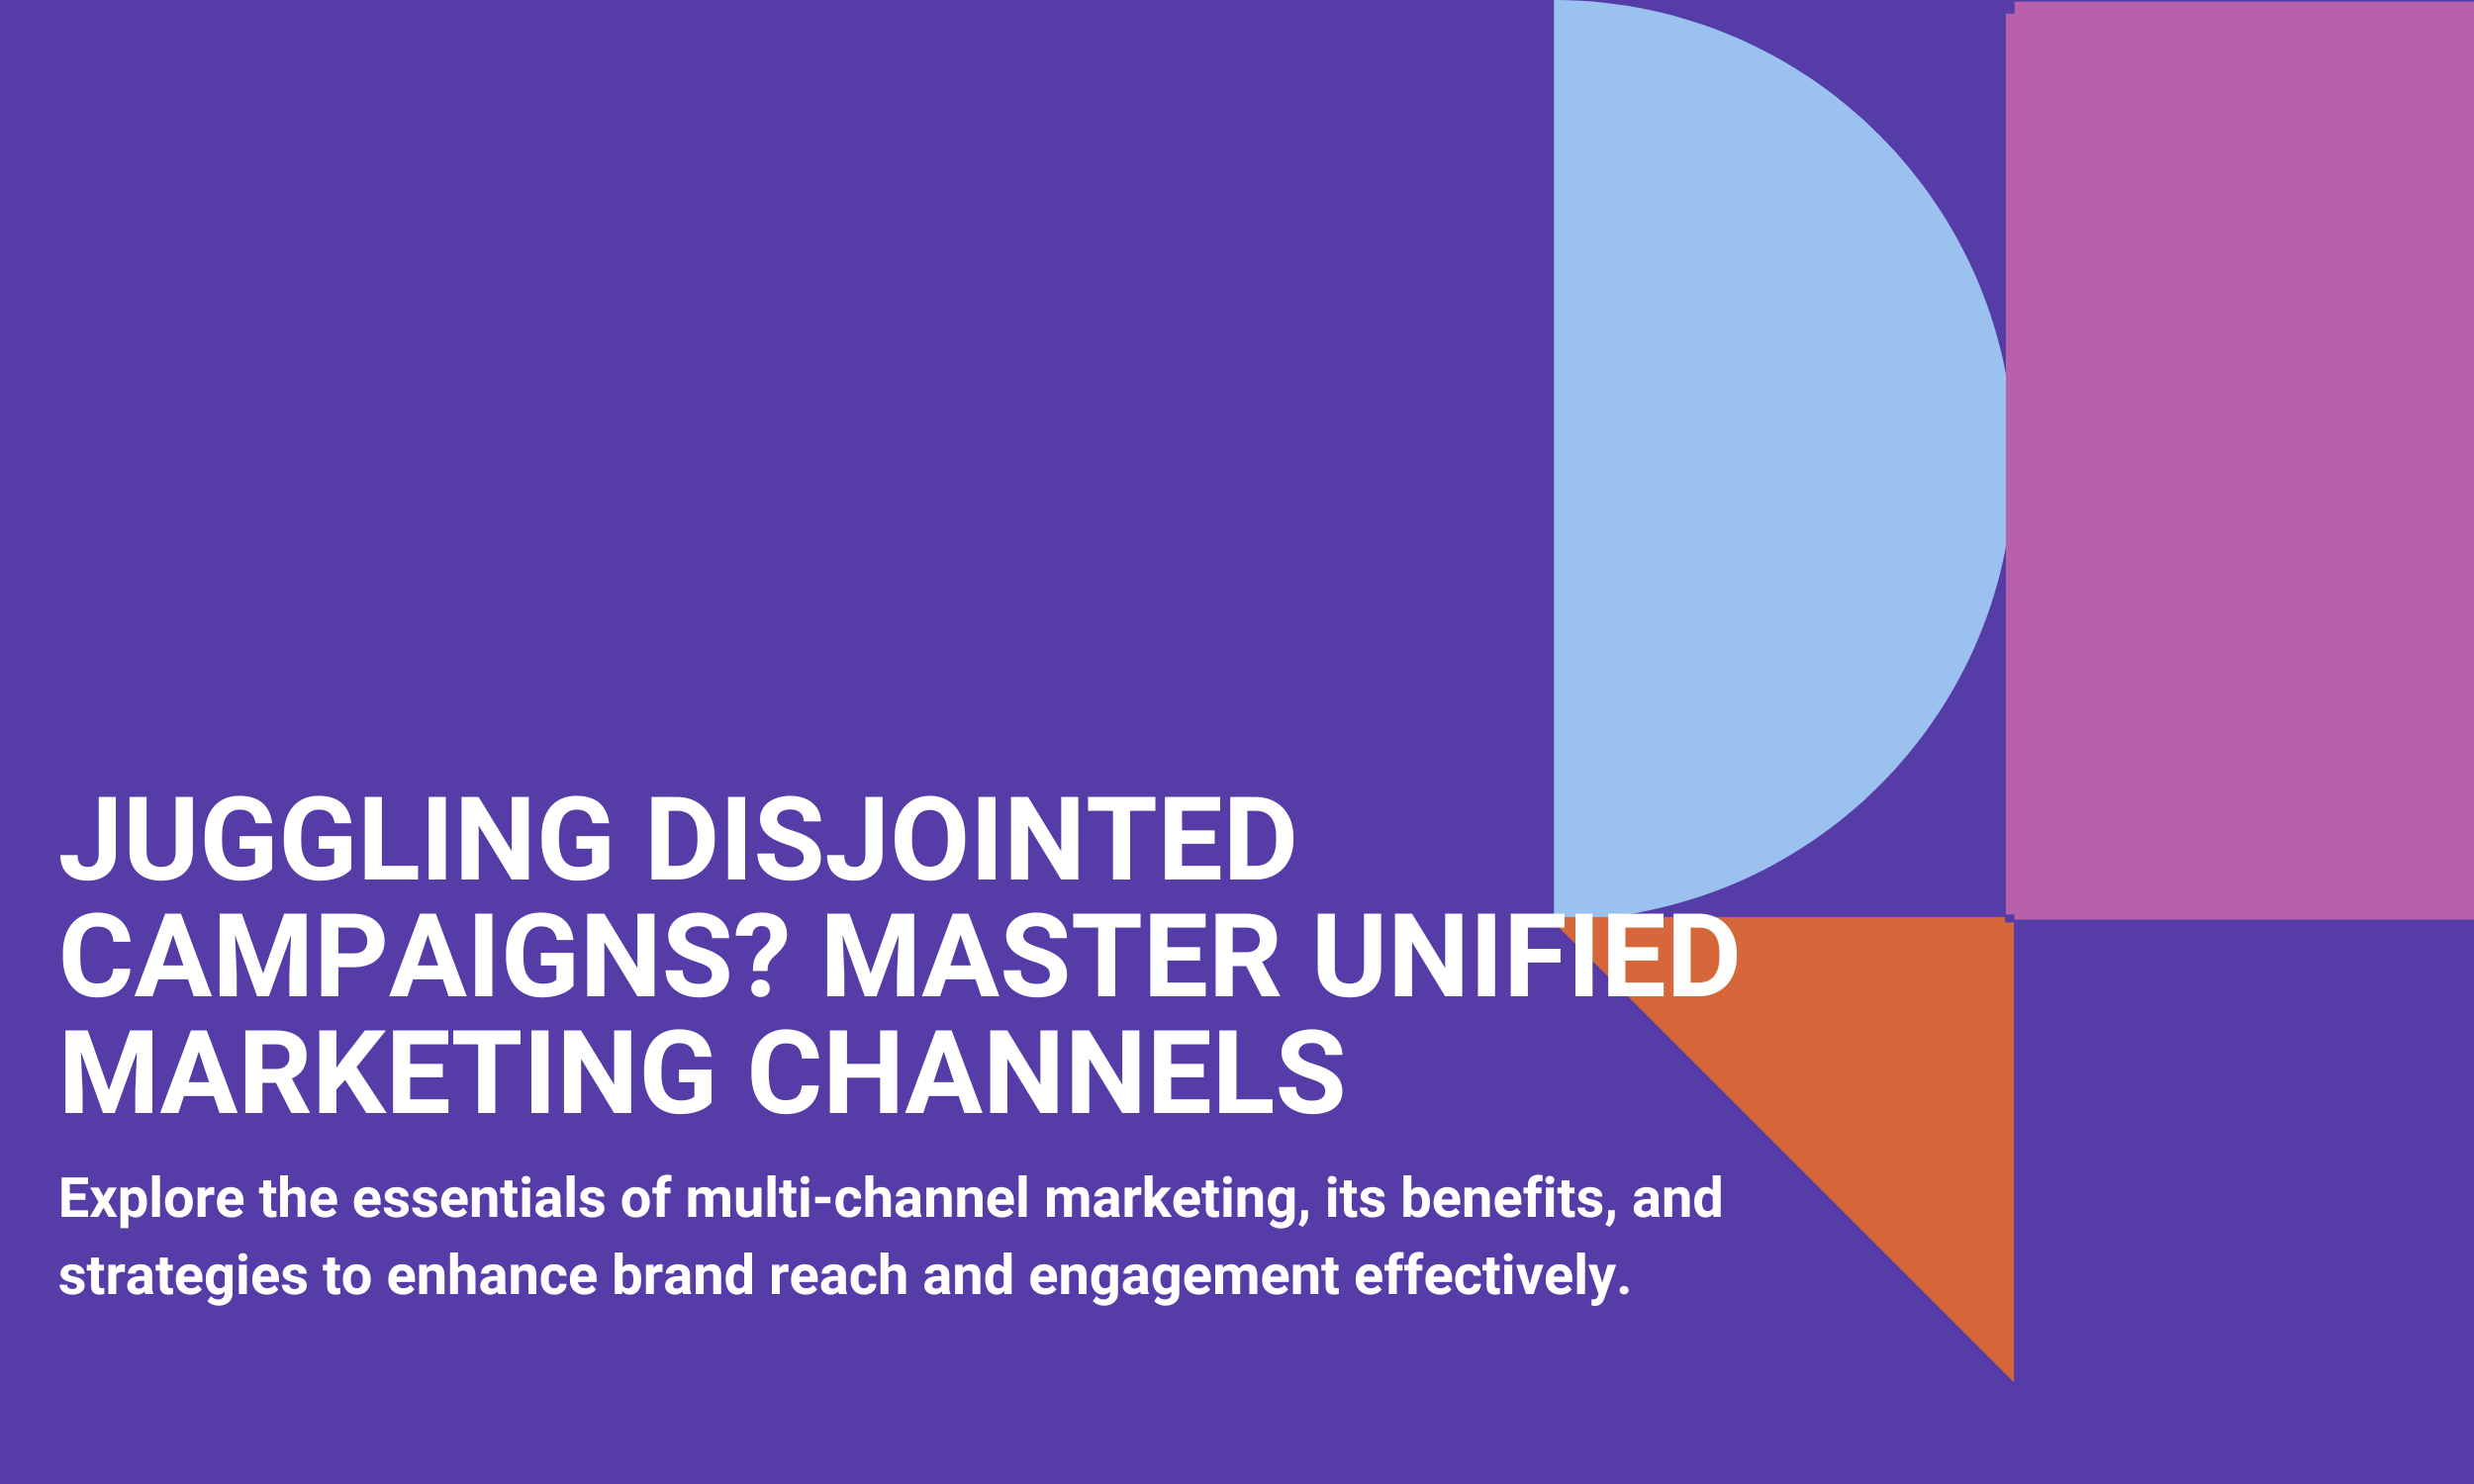 Juggling Disjointed campaigns? Master Unified Marketing Channels